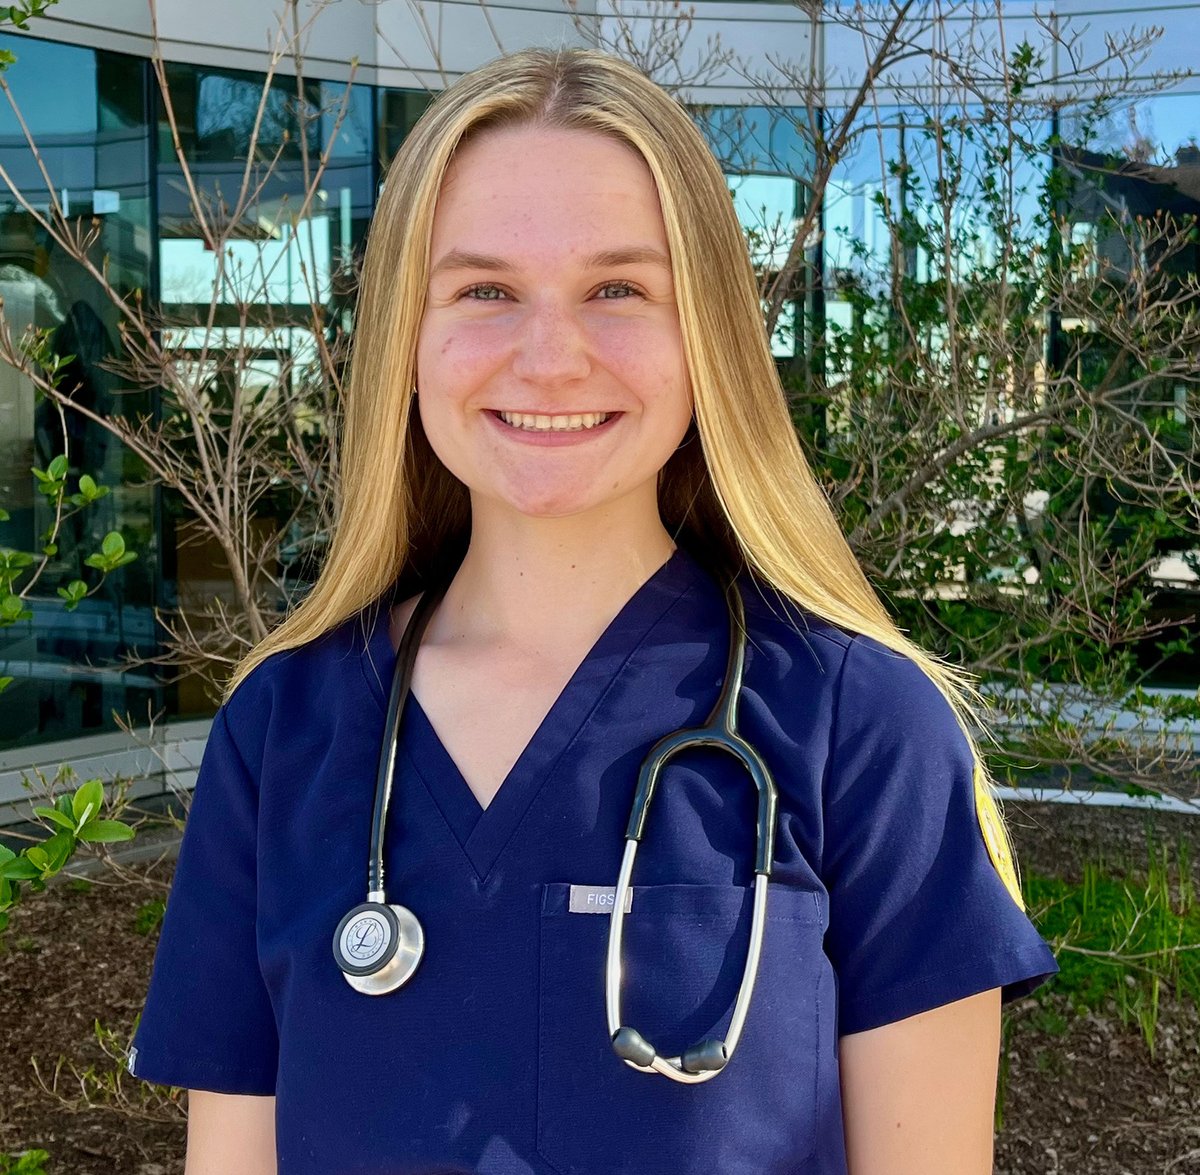 Excited to share an article in The University Record featuring one of our senior nursing students and all she has accomplished at UMSN. myumi.ch/DrWbQ #MichiganNursing #WeDare #GoBlue